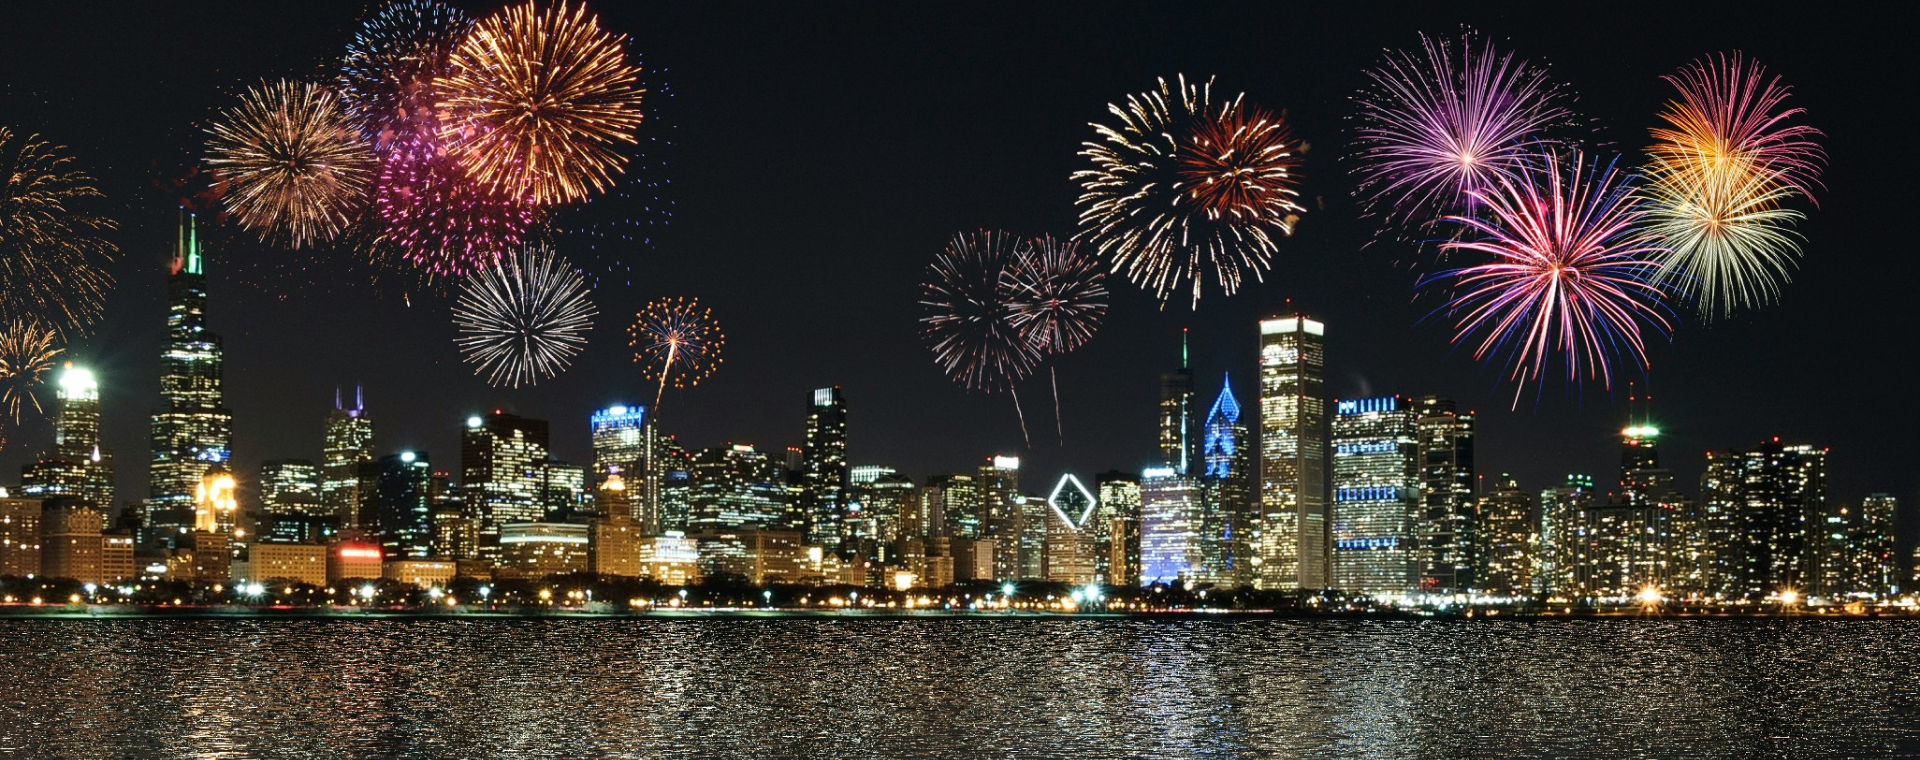 A colorful fireworks display over a city skyline at night, reflecting on the water below.